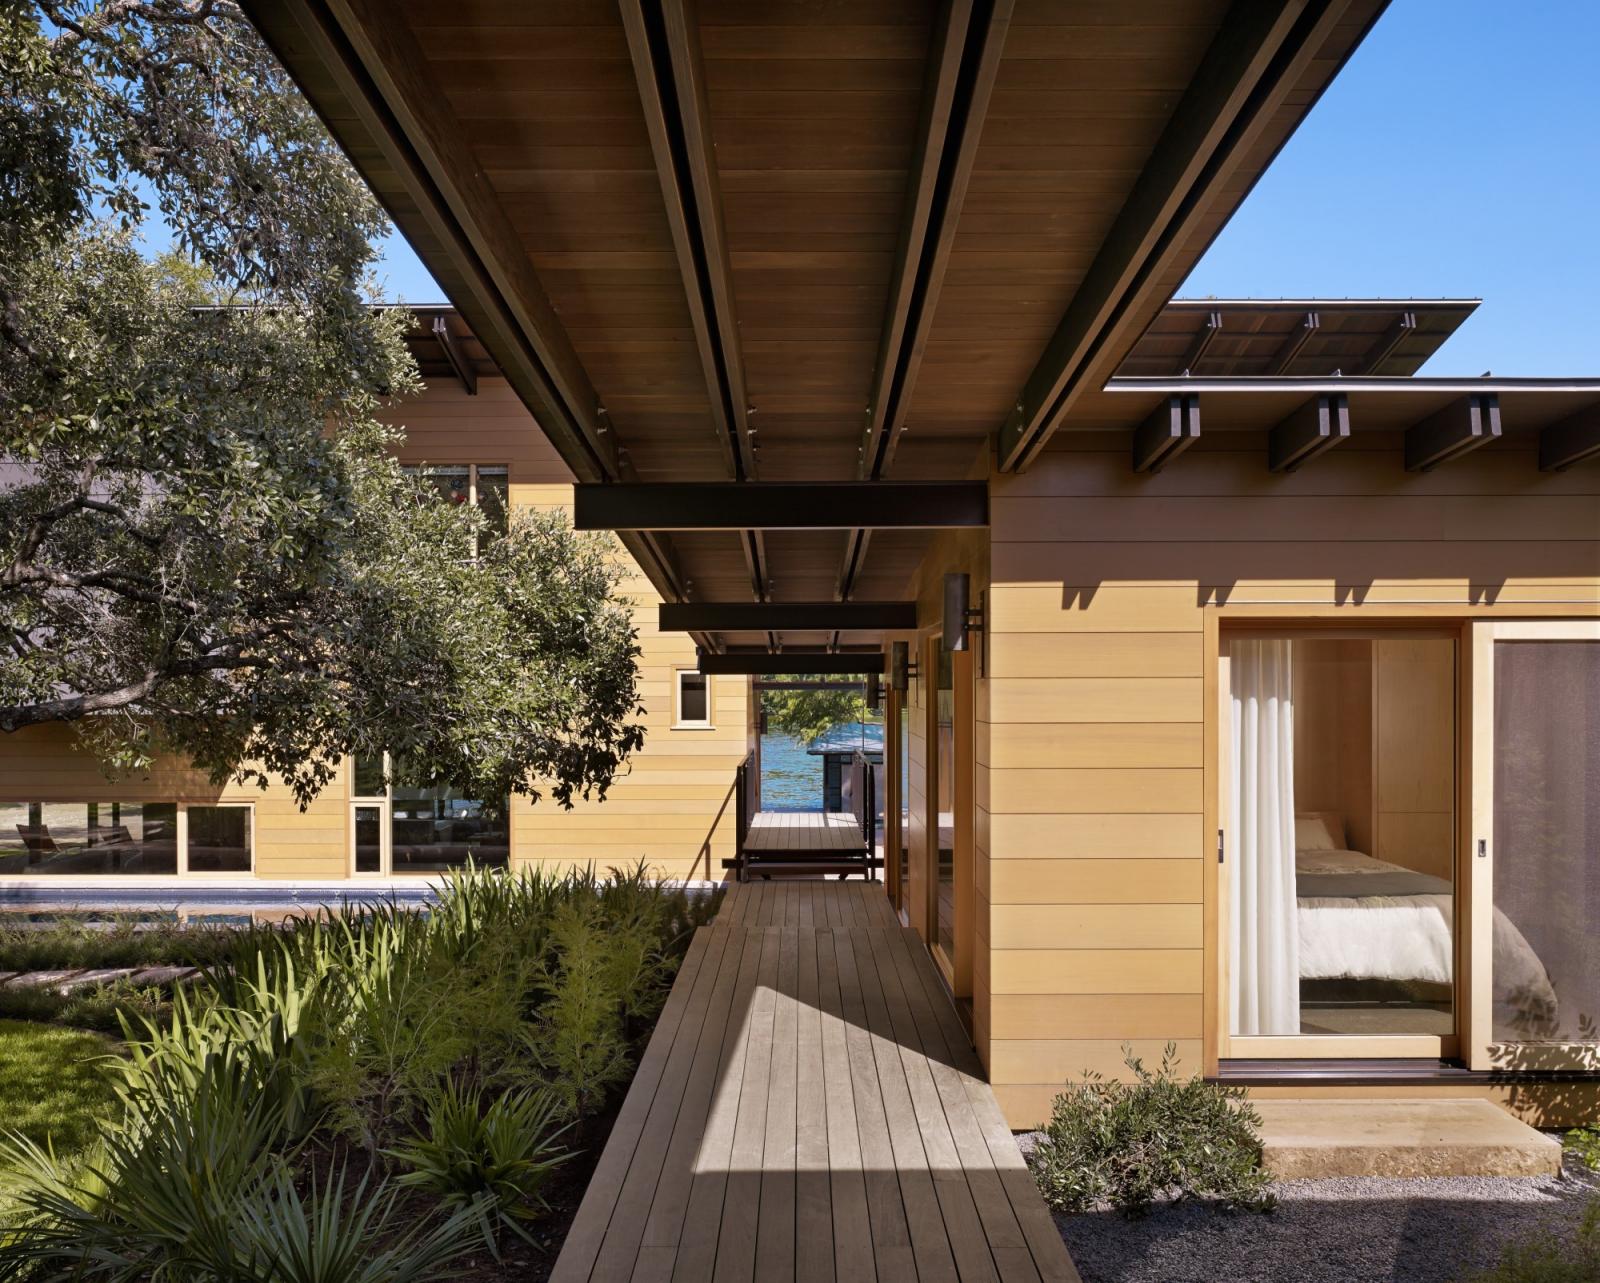 Hog Pen Creek Residence. A long exterior boardwalk connects a series of structures that stair step down the hillside, crossing a 75-foot lap pool and terminating at a screened pavilion by the water’s edge. 